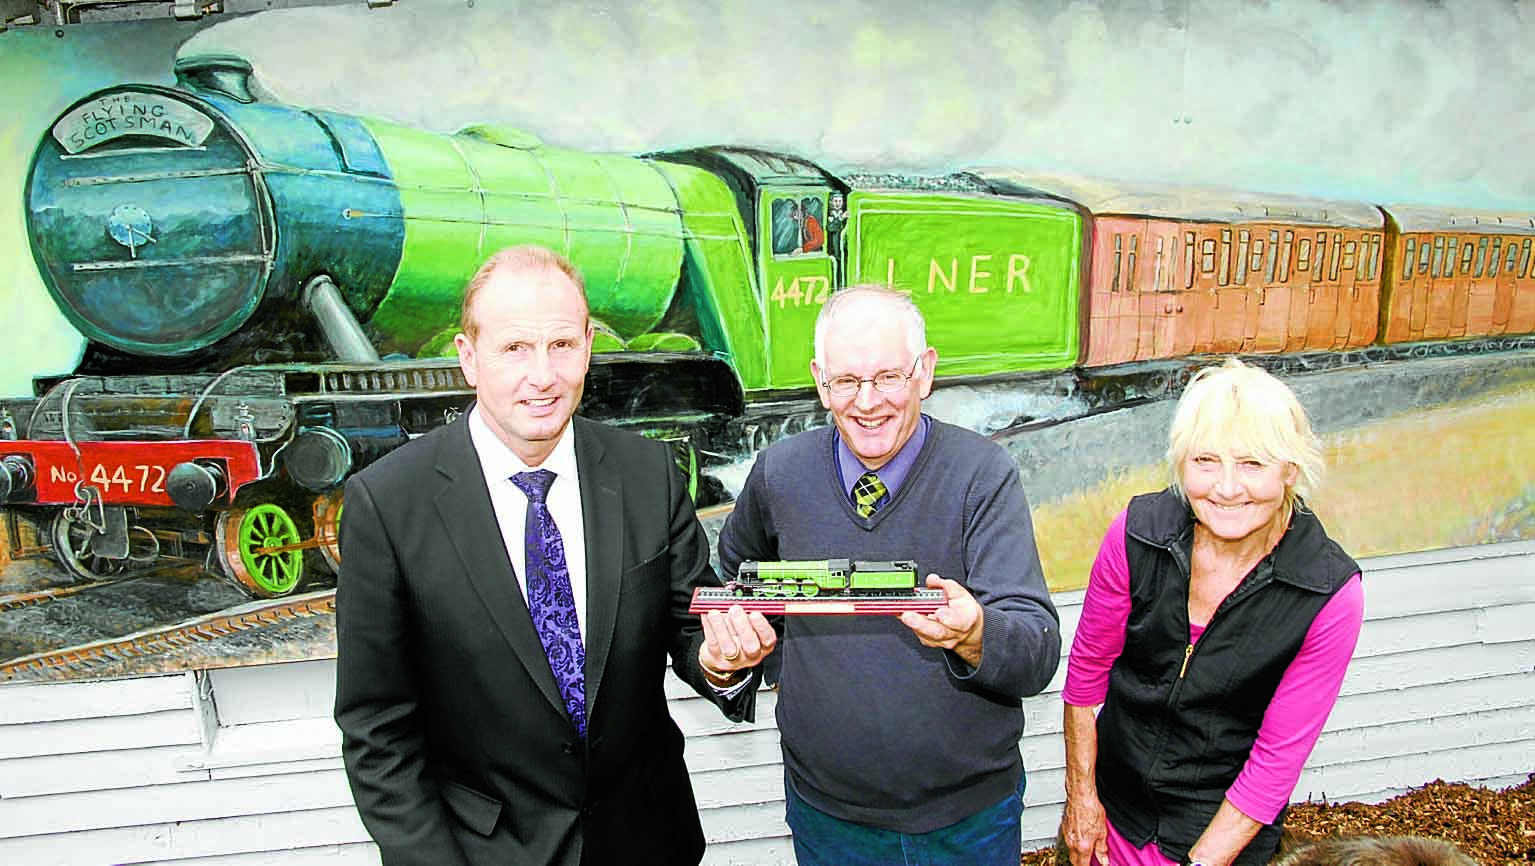 Station art boosts awards ambitions